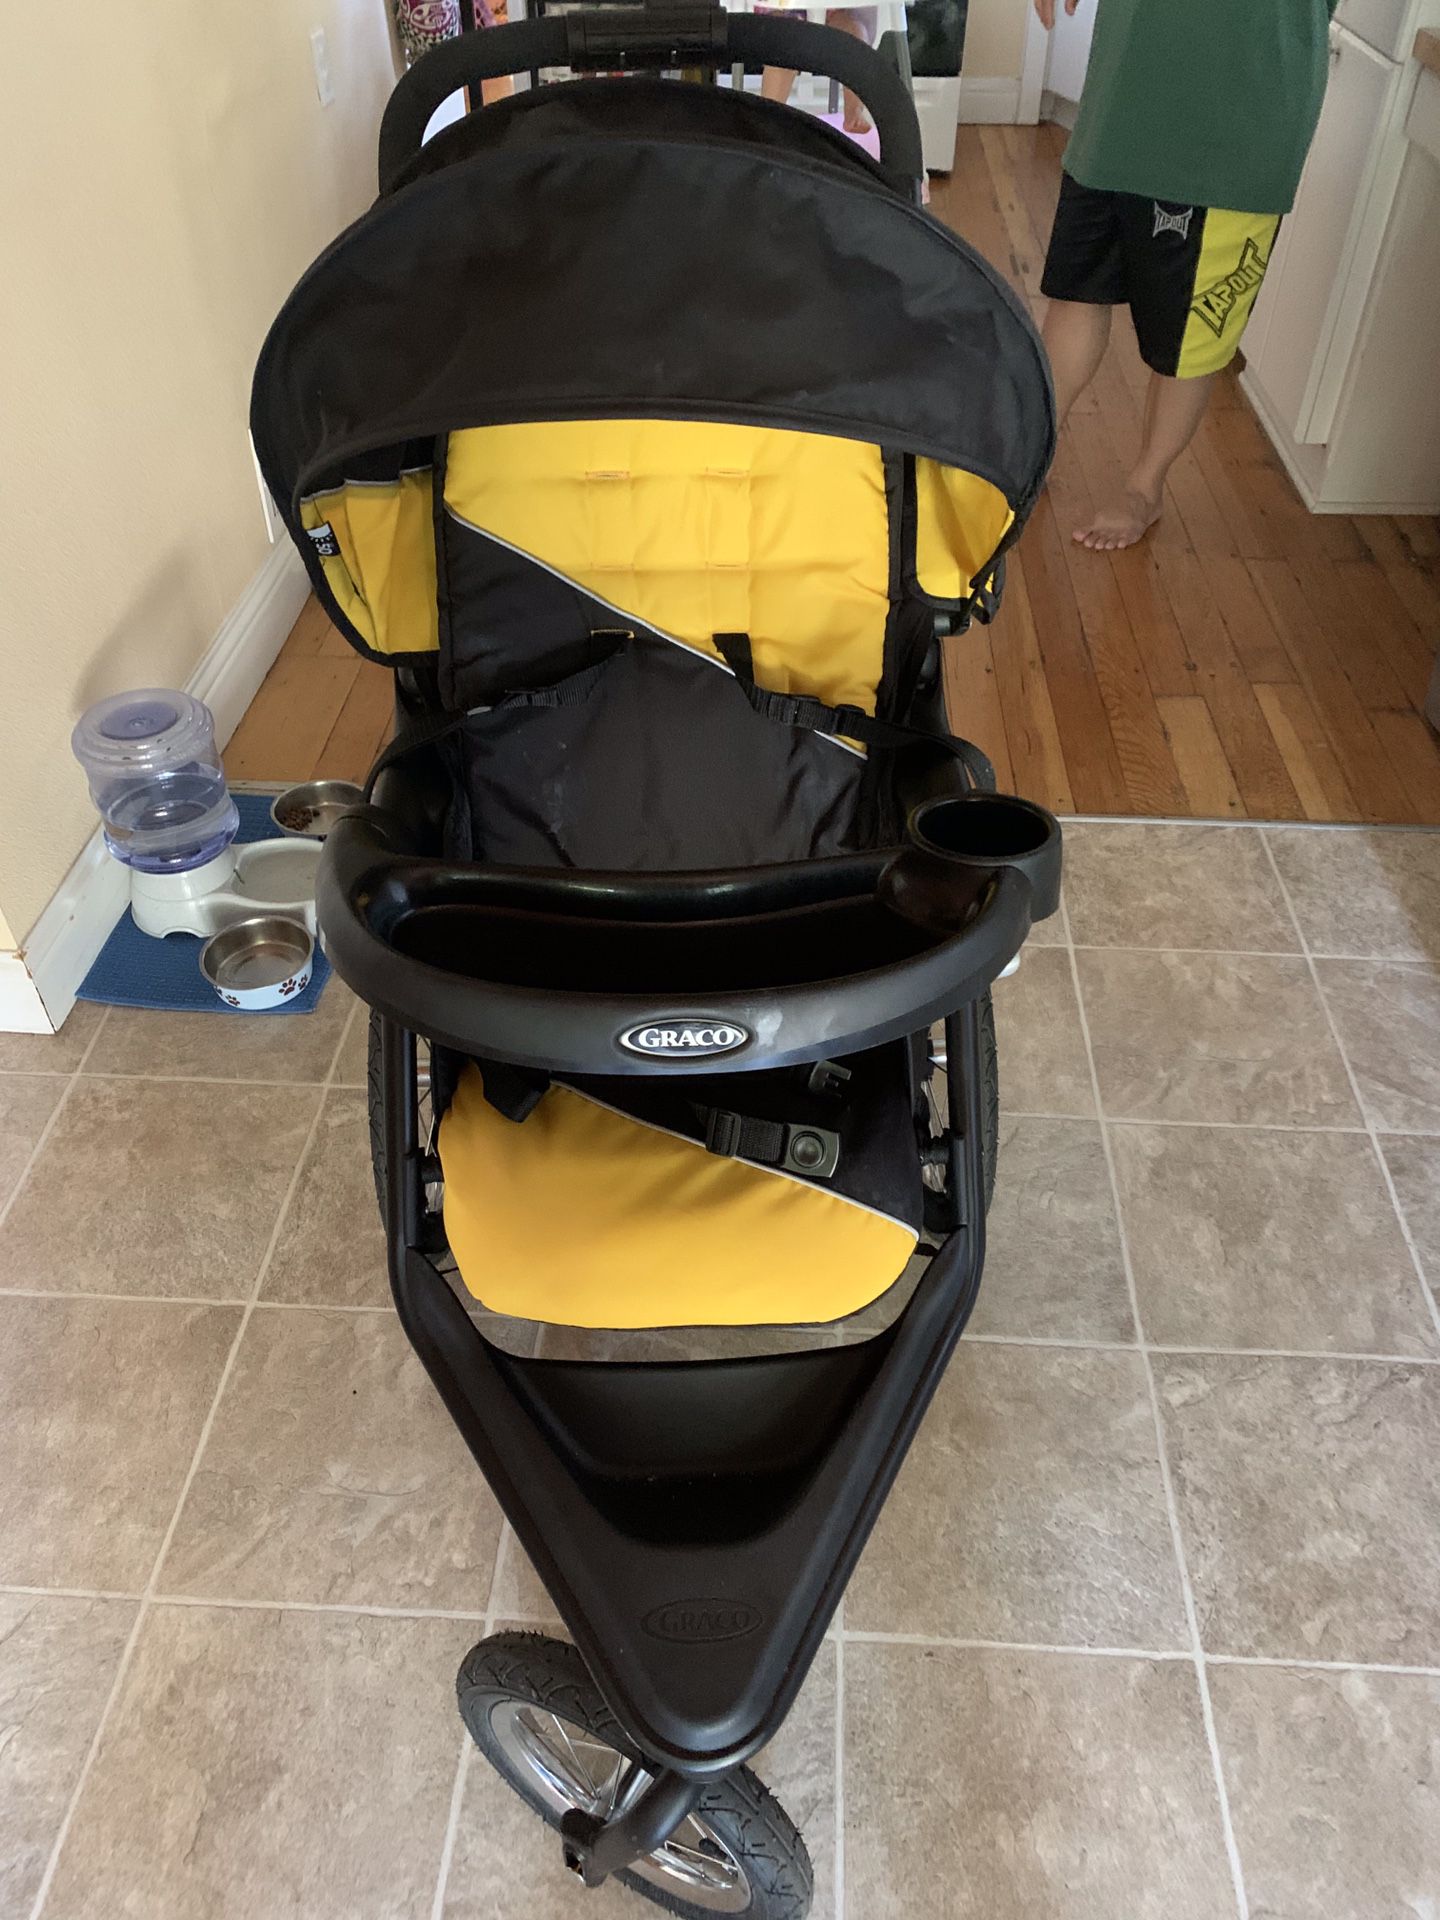 Graco Jogging Stroller with car seat